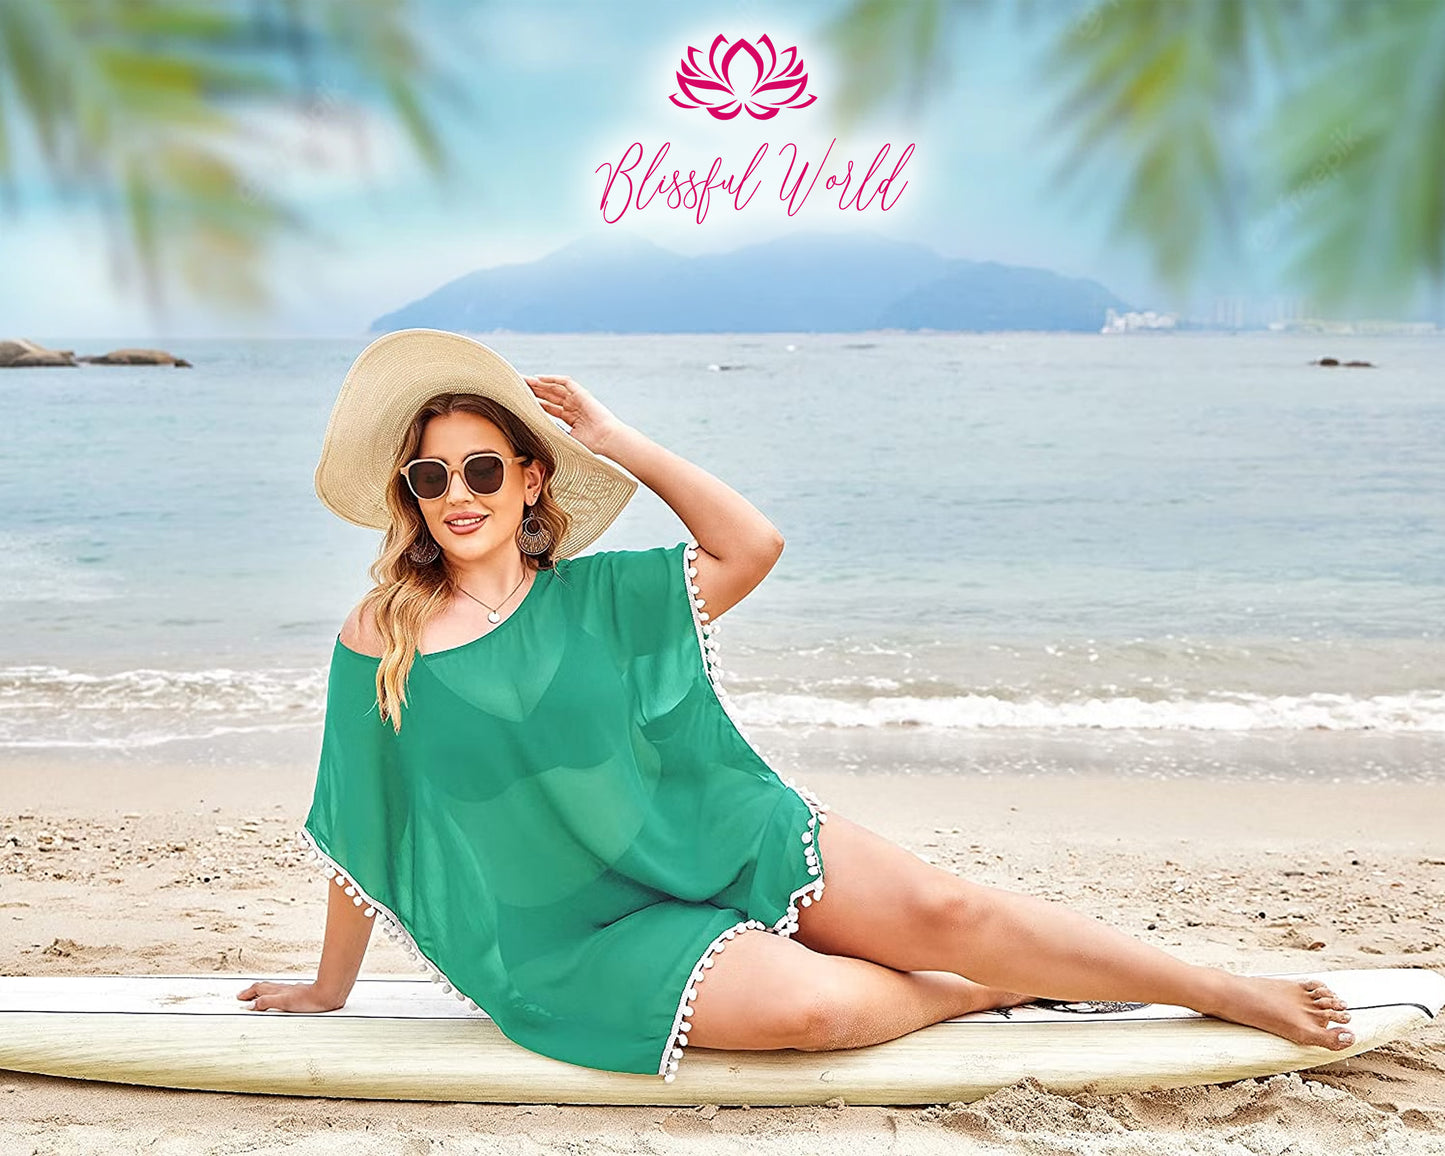 Customized Swimsuit cover ups, Bridesmaid Long Cover up, Swim Cover ups, Bridesmaid outfits, Bach Matching outfits, Bride Squad gifts-Long